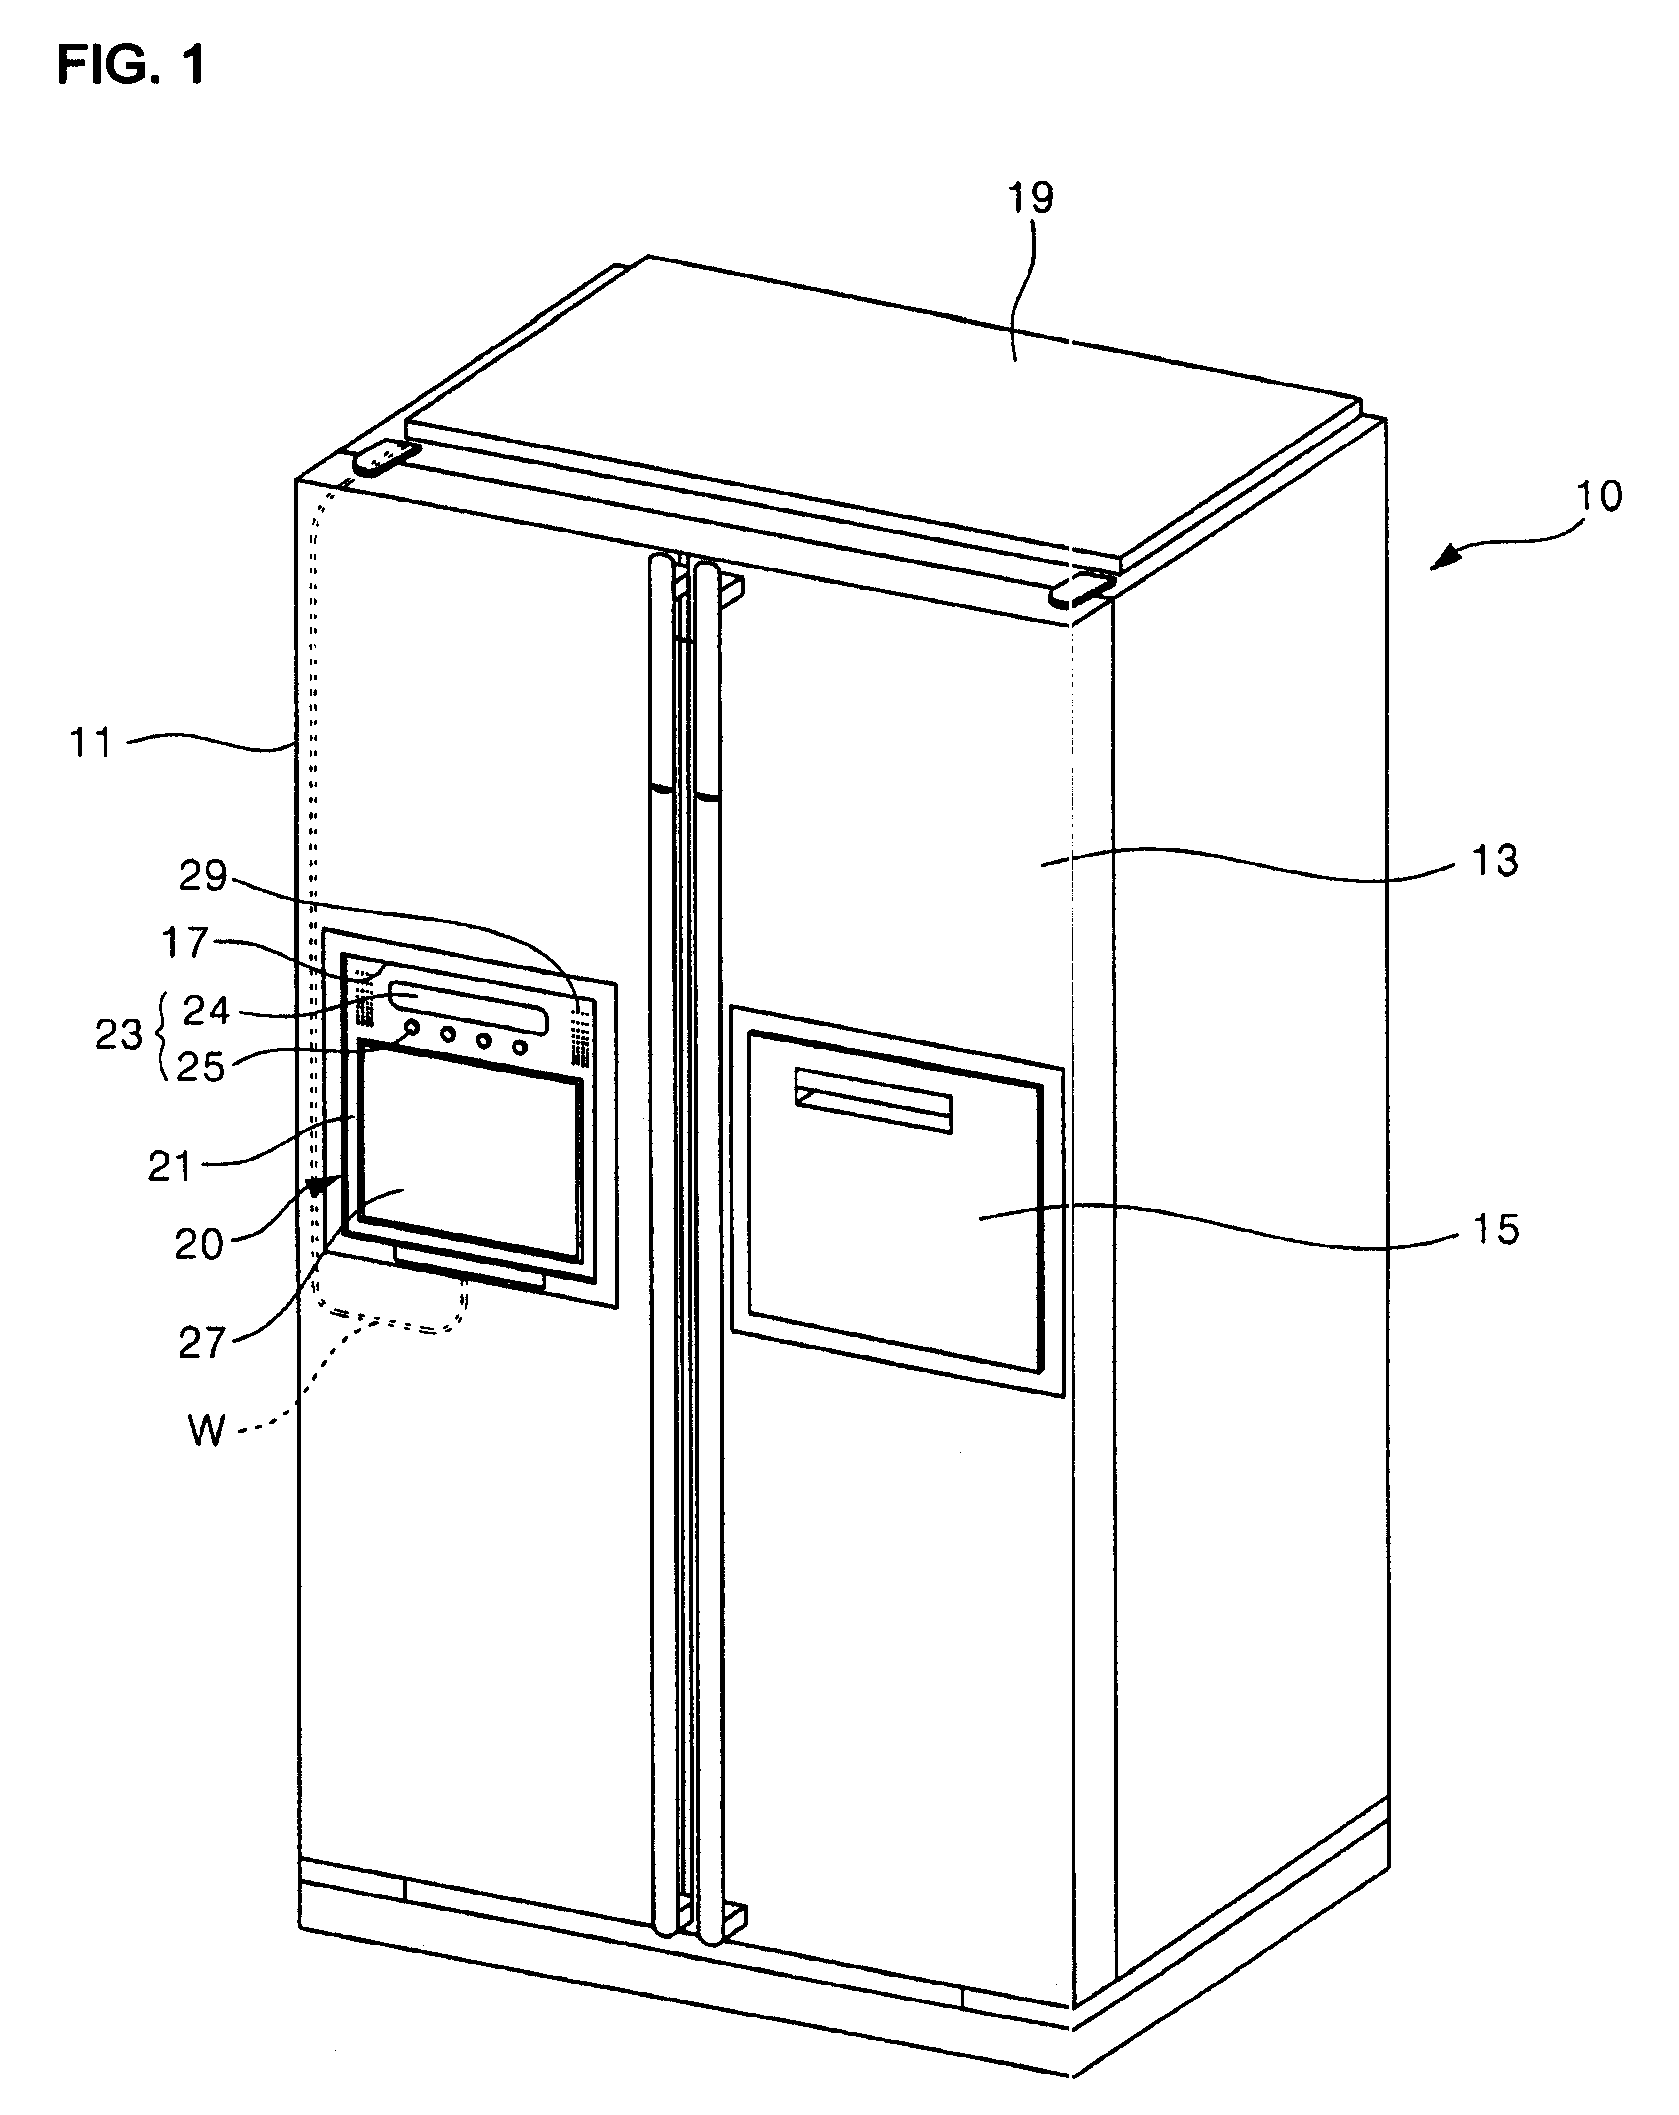 Mounting structure for display unit in refrigerator